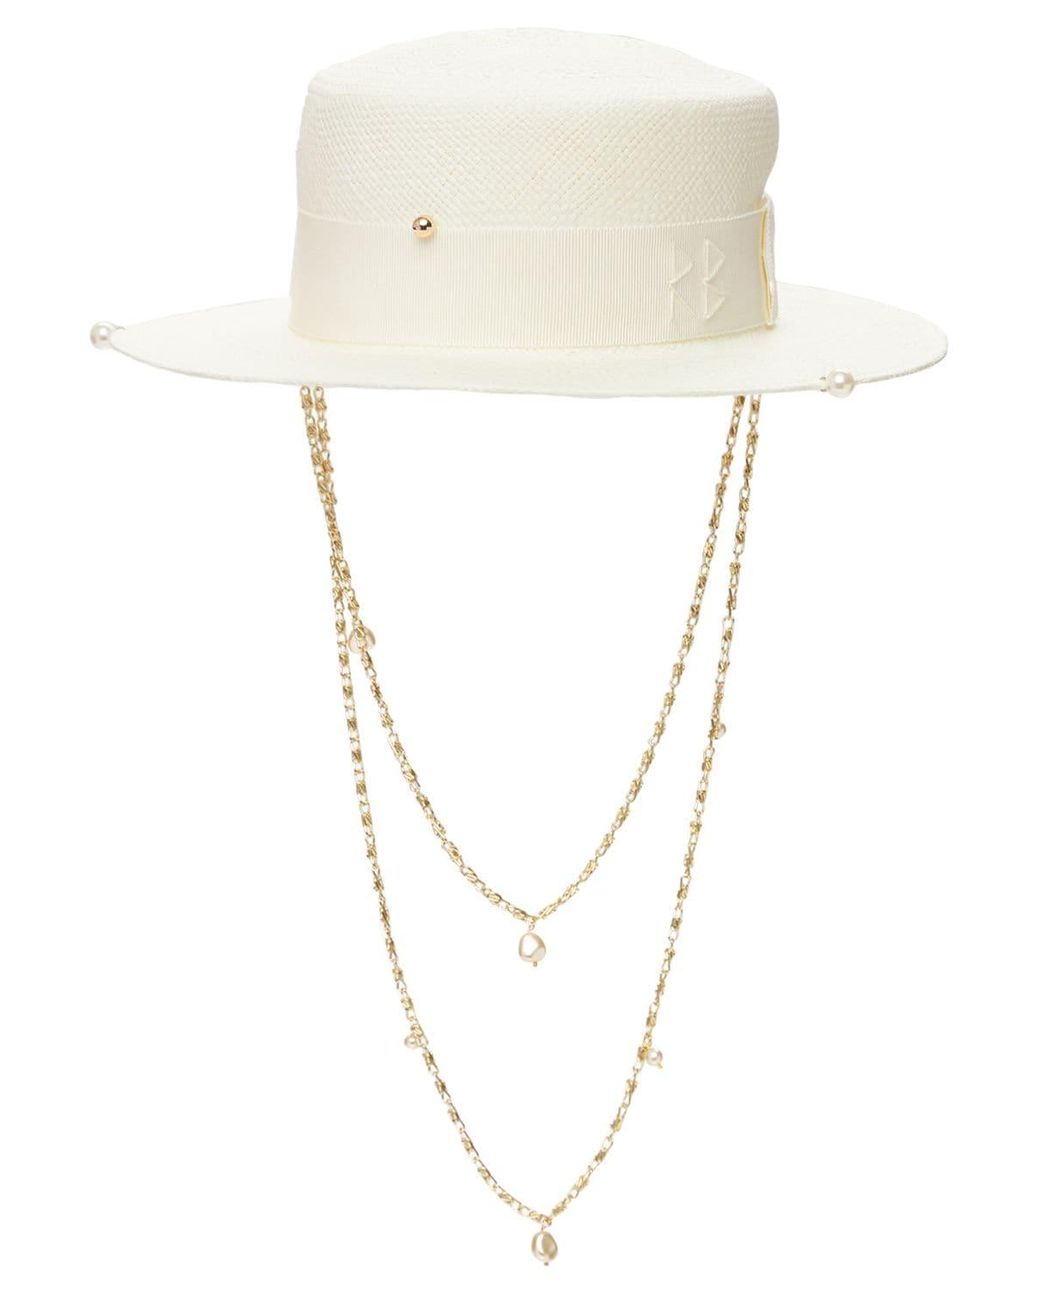 Ruslan Baginskiy Cotton Double Chain Strap Straw Boater Hat in White ...